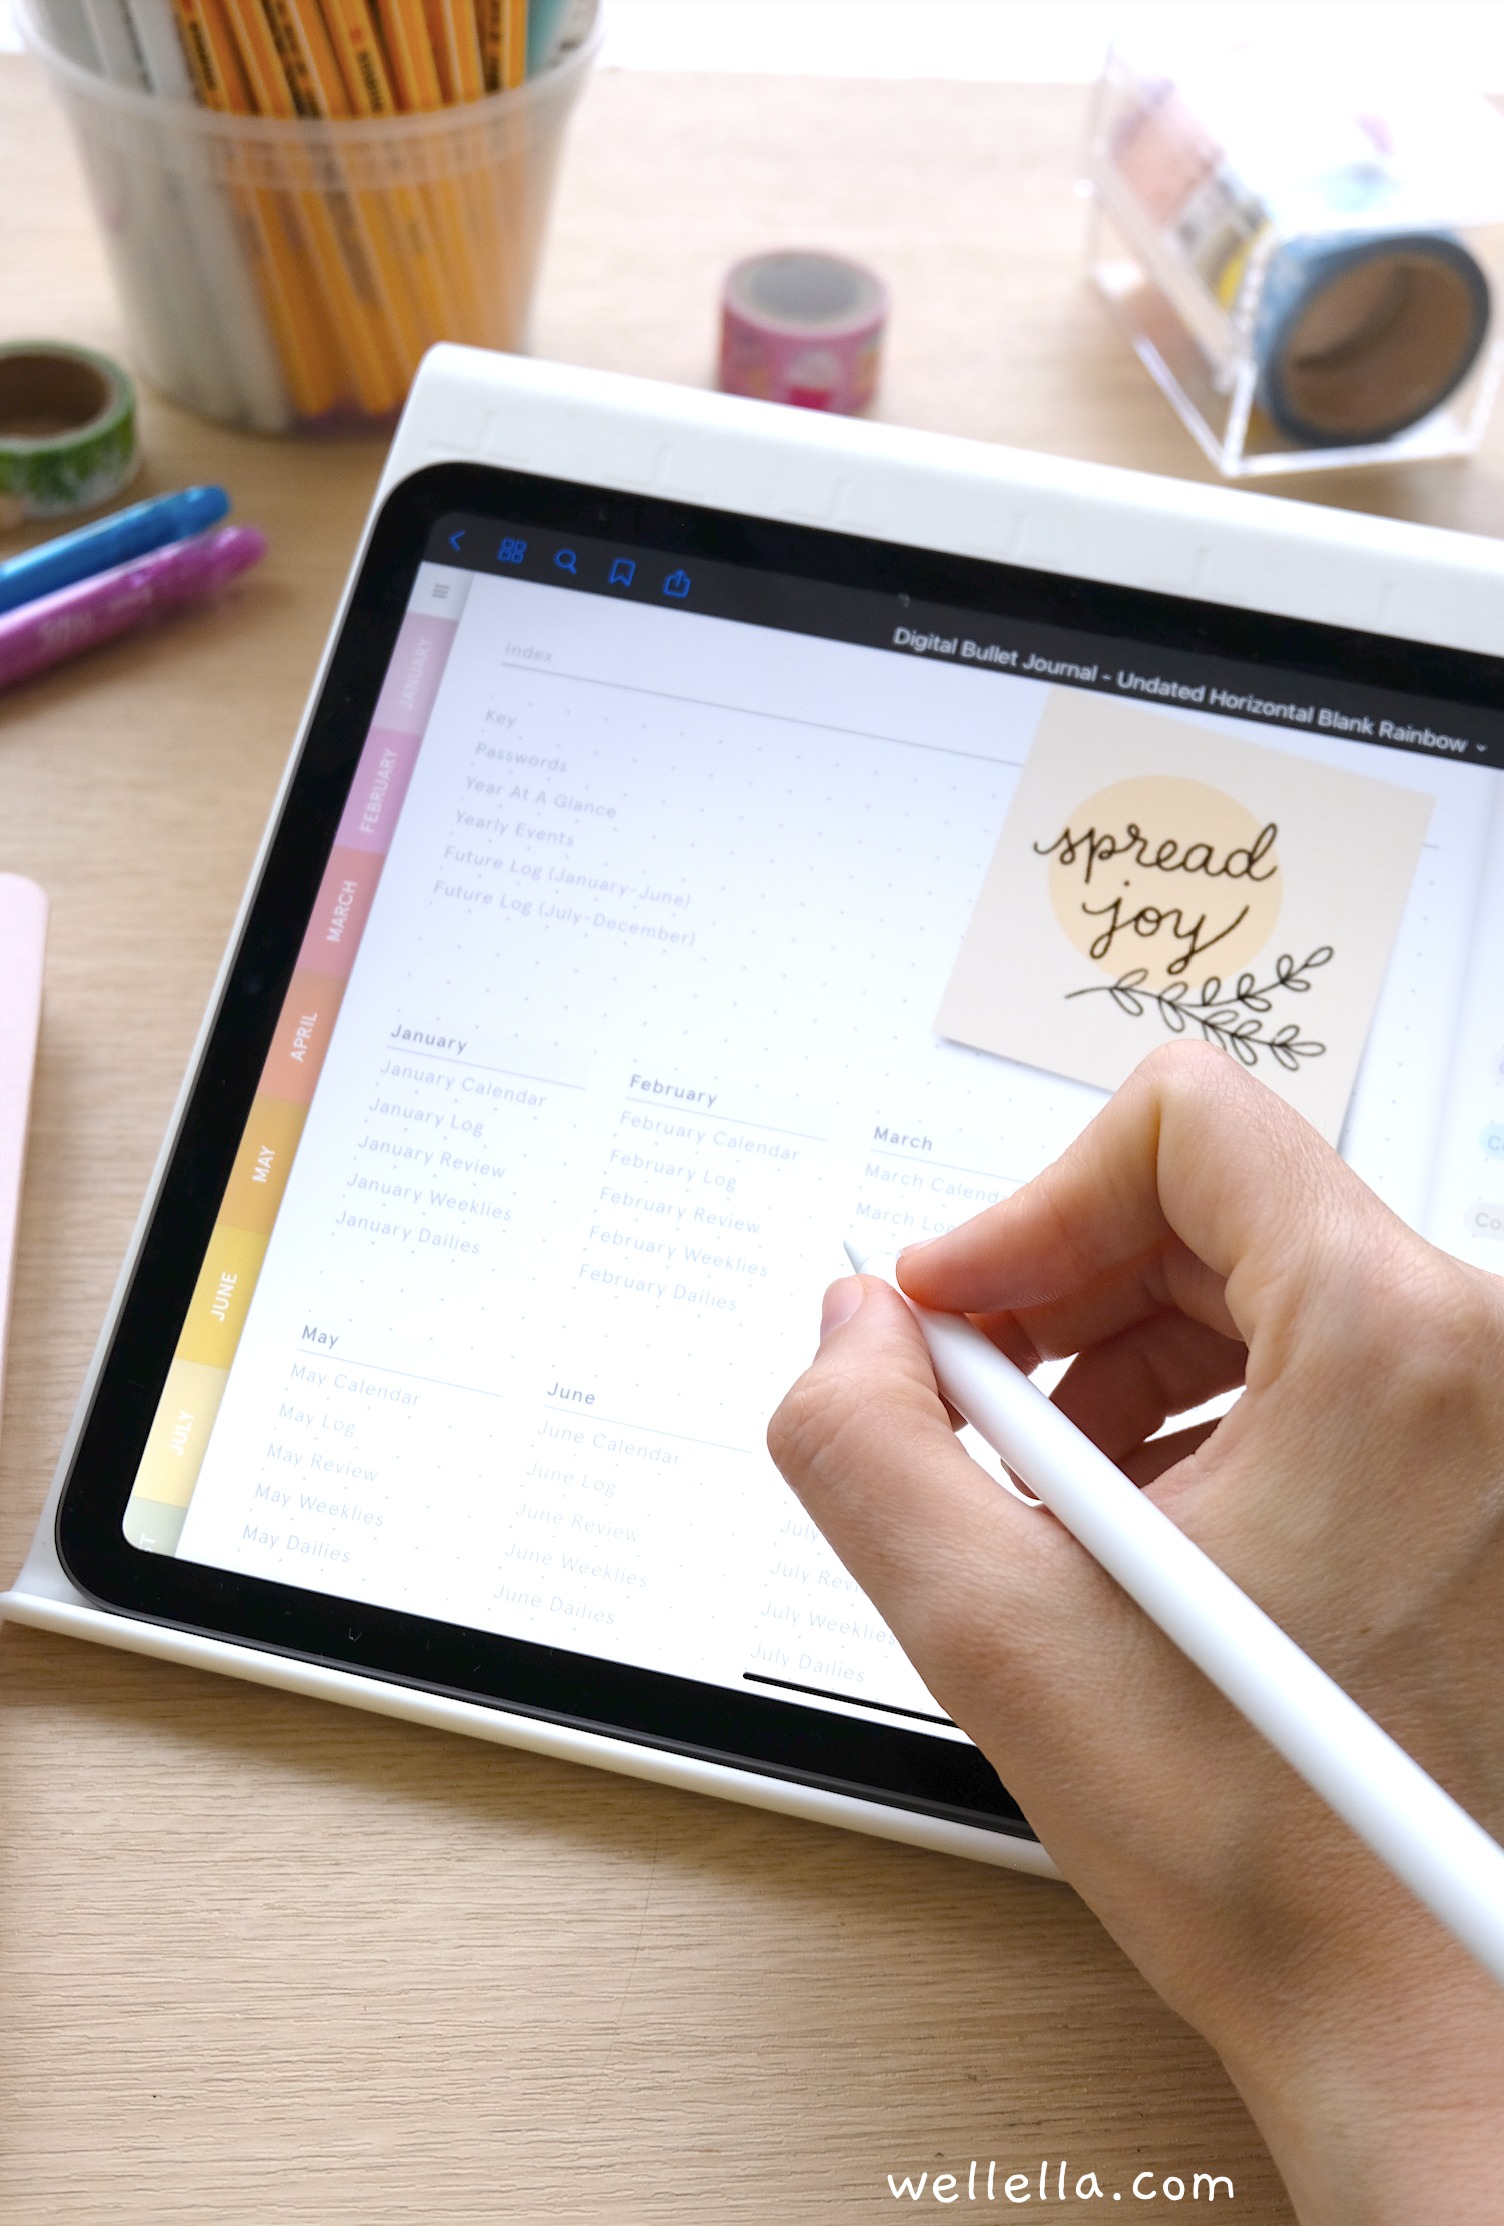 An ipad with a digital bullet journal on a table, as someone writes on the page using an apple pencil.